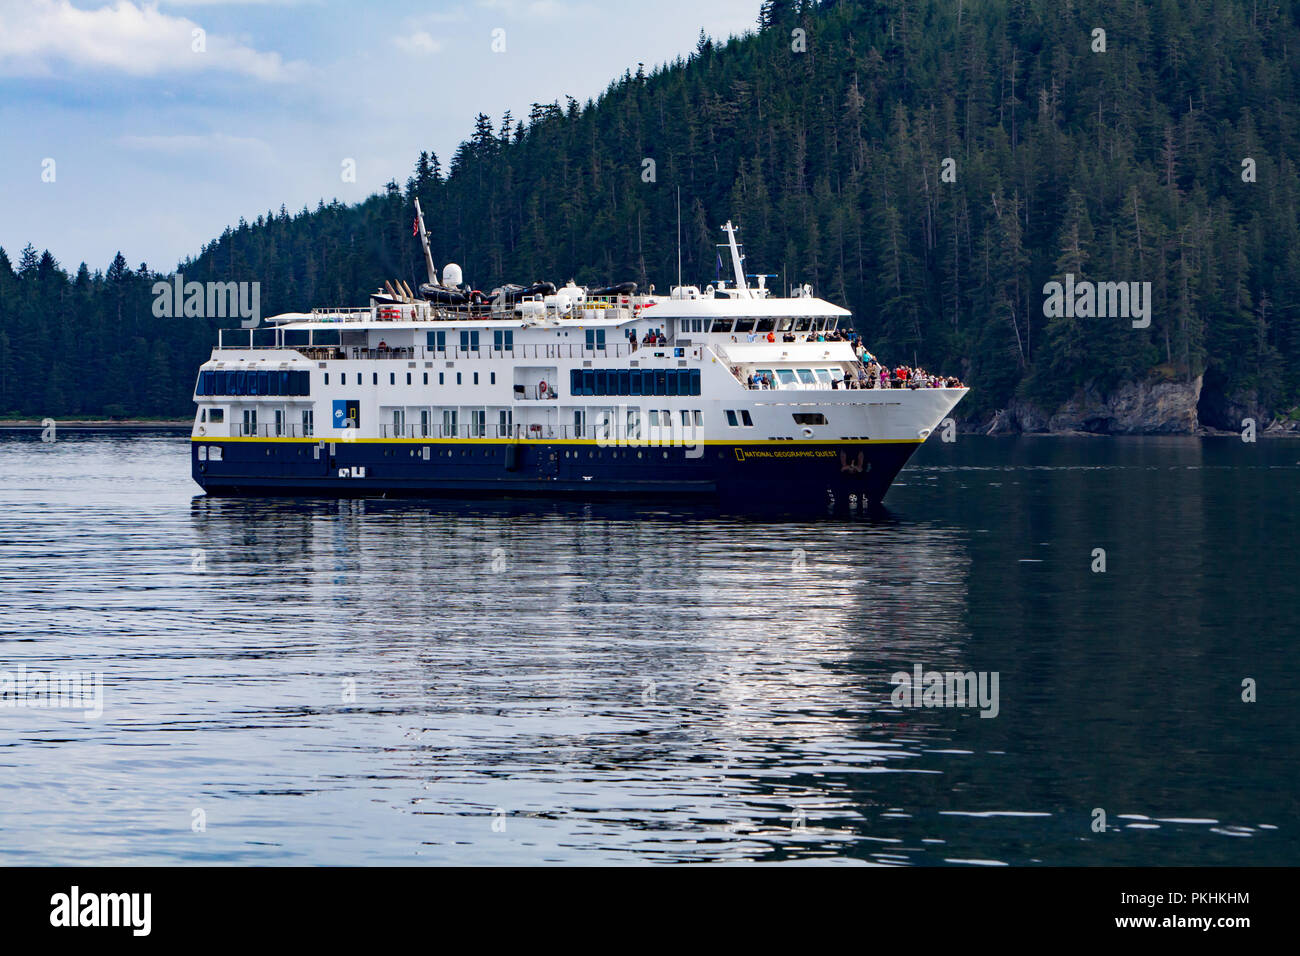 The expedition cruise ship, the National Geographic Quest sails in Chatham Strait in Southeast Alaska filled with ecotourists to look for whales. Stock Photo